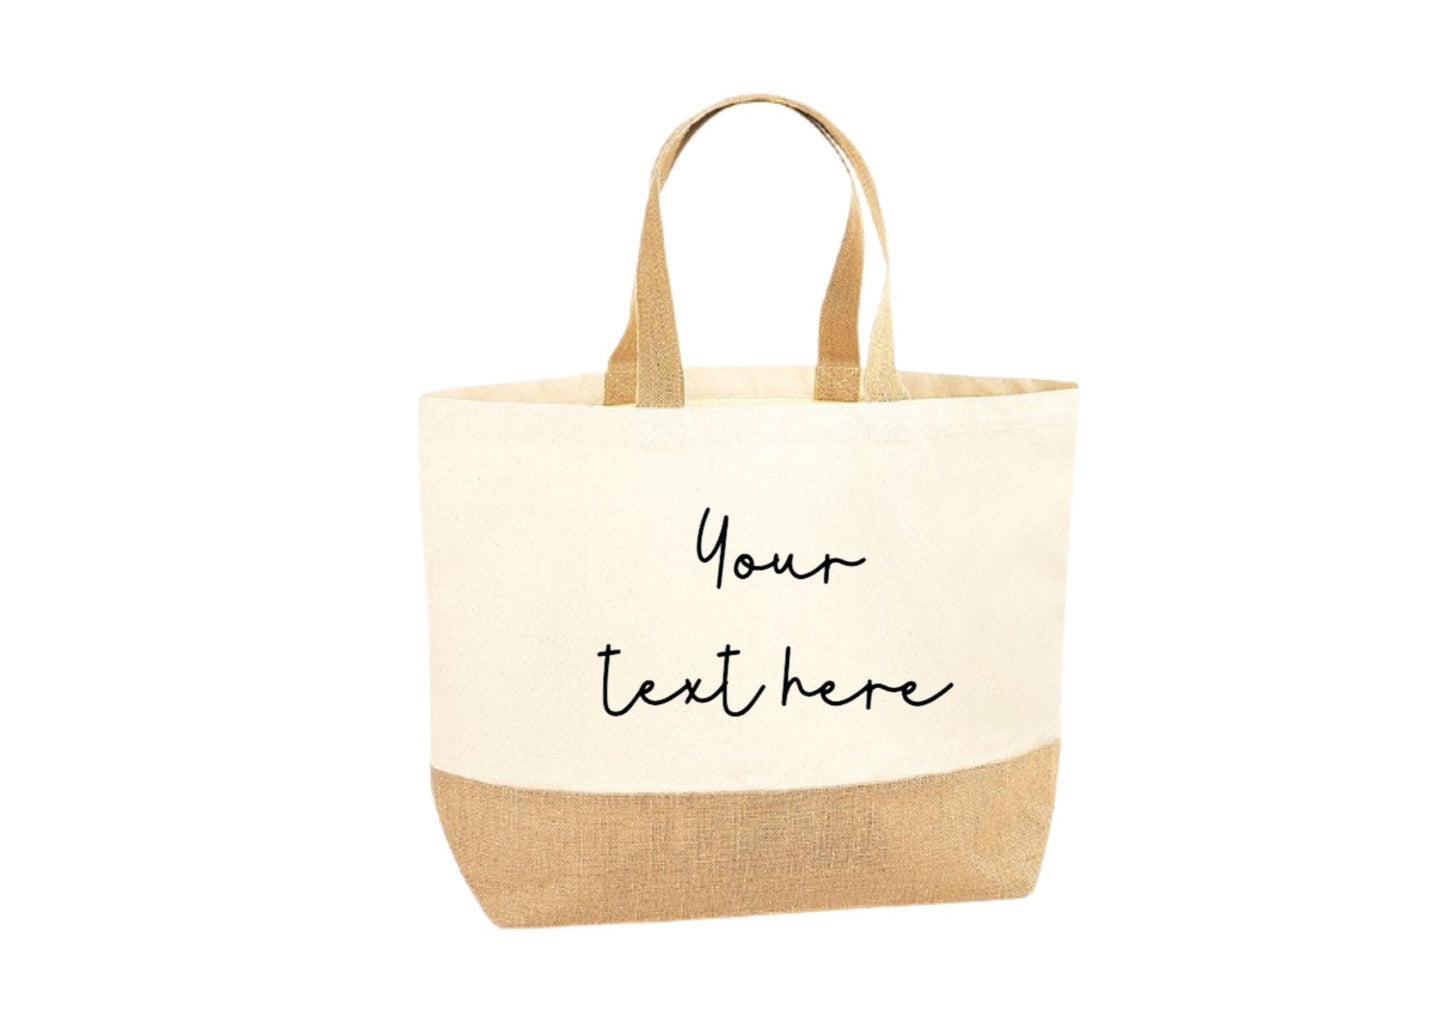 Personalised Strong and Large Tote Bag perfect for shopping, travel, picnics. Designed with text or message of choice 